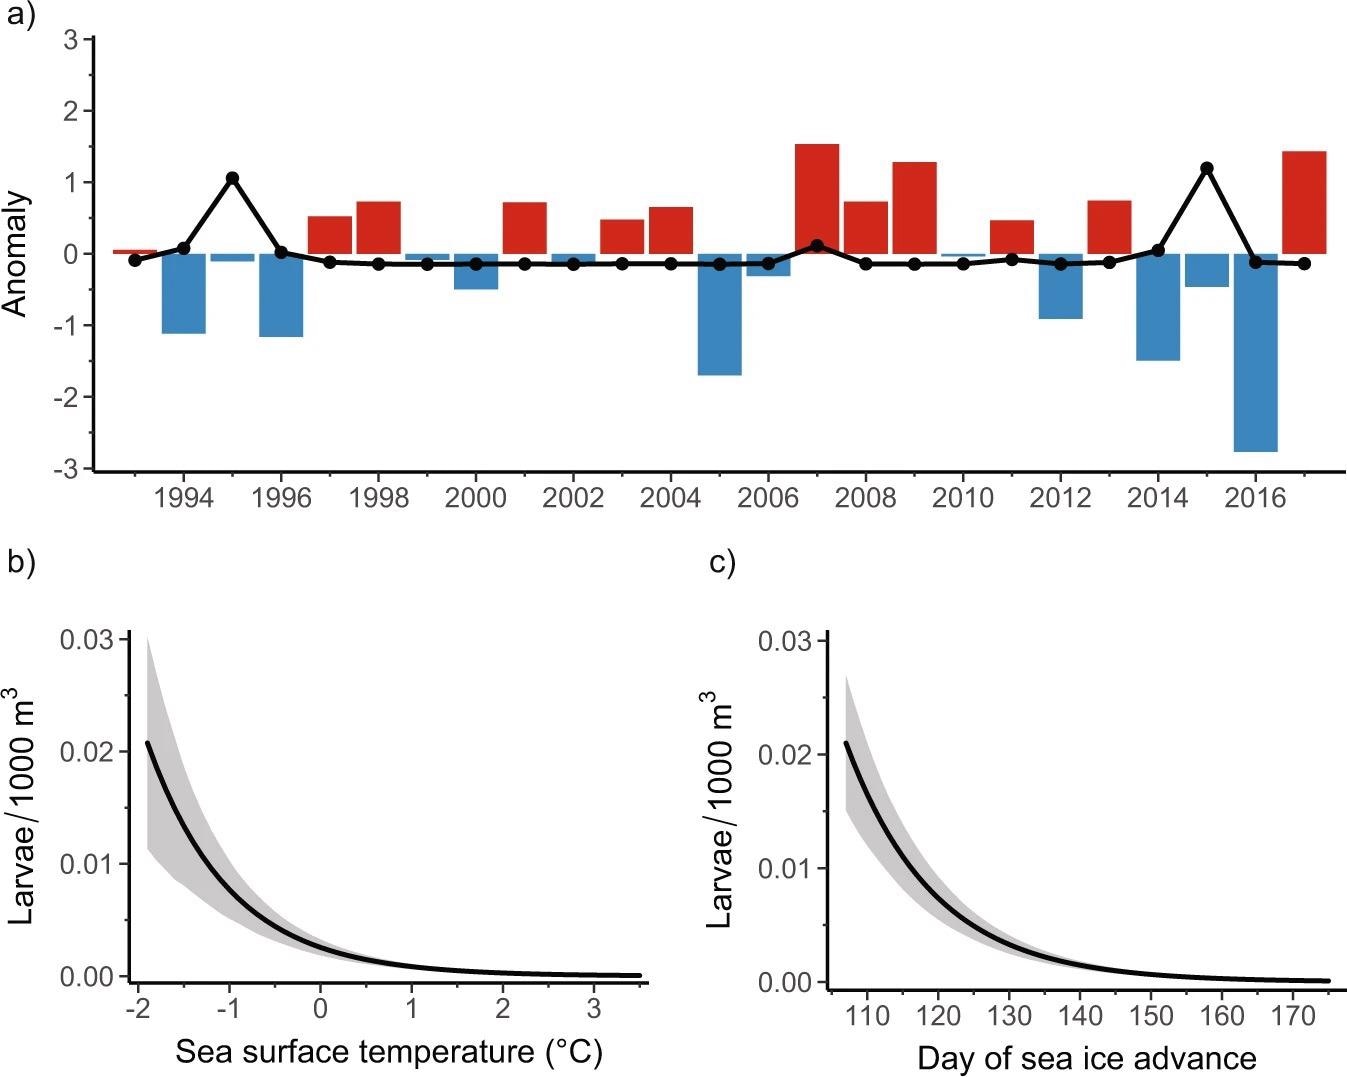 Relationships between sea surface temperature, sea ice, and Antarctic Silverfish abundance. (a) Positive (red; warmer temperatures) and negative (blue; cooler temperatures) anomalies in the standardized mean sea surface temperature (see “Methods”) for the Palmer LTER study region during austral summer (December, January, February). Standardized anomalies in mean annual larval Antarctic Silverfish abundance (larvae/1000 m3) that were captured during January and February are overlaid (black dotted line). (b, c) Predicted impact (solid black lines) on larval Antarctic Silverfish abundance from (b) sea surface temperature (p < 0.001) and (c) lagged day of sea ice advance (p < 0.001) from the model. Sea ice advance was temporally lagged in the model to align with life history patterns in adult Antarctic Silverfish abundance. The shaded regions represent the 95% prediction interval, which considers uncertainty from the fixed effects, zero-inflation, and random effects components of the final model.